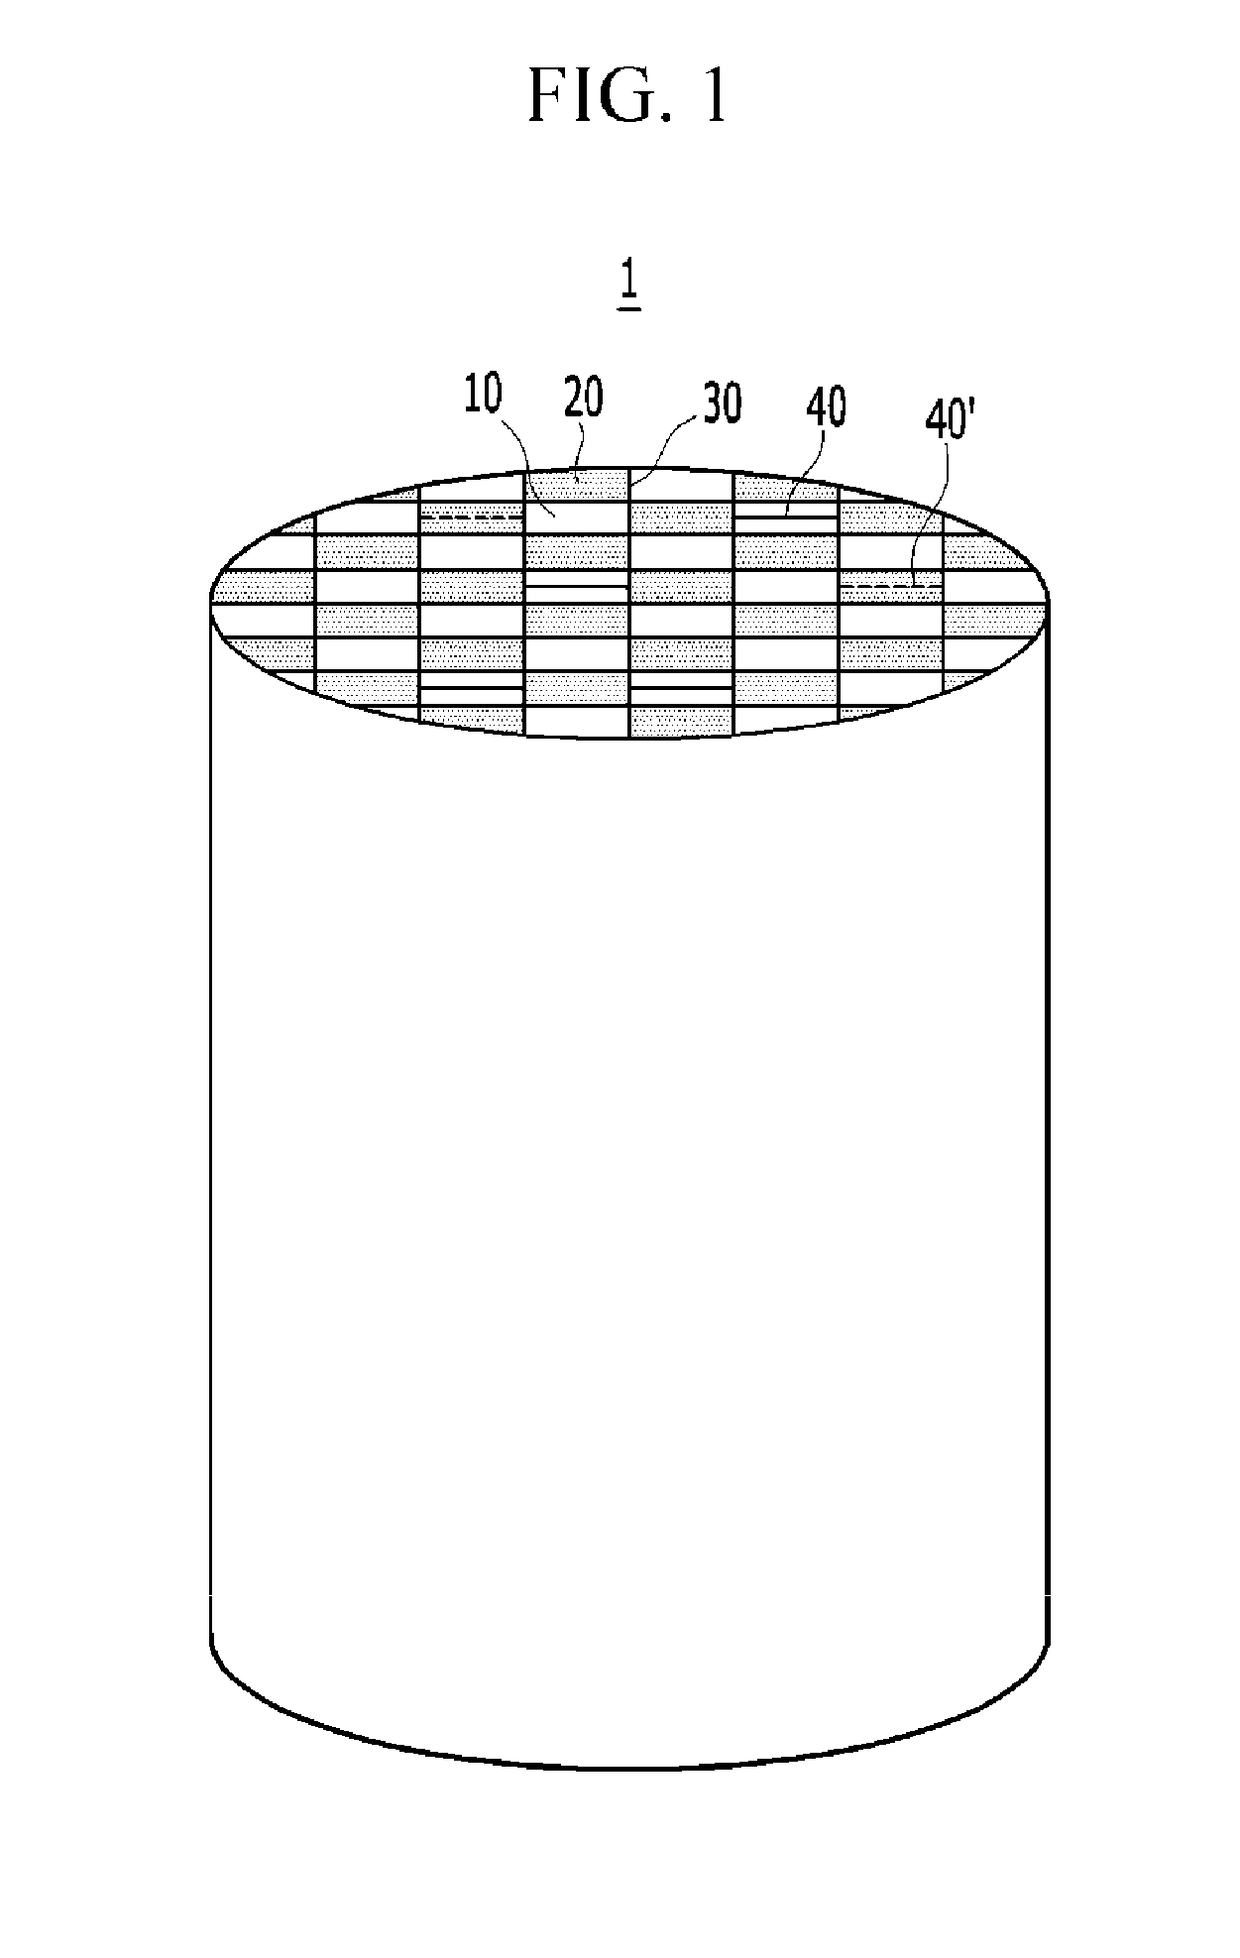 Method of manufacturing catalyzed particulate filter